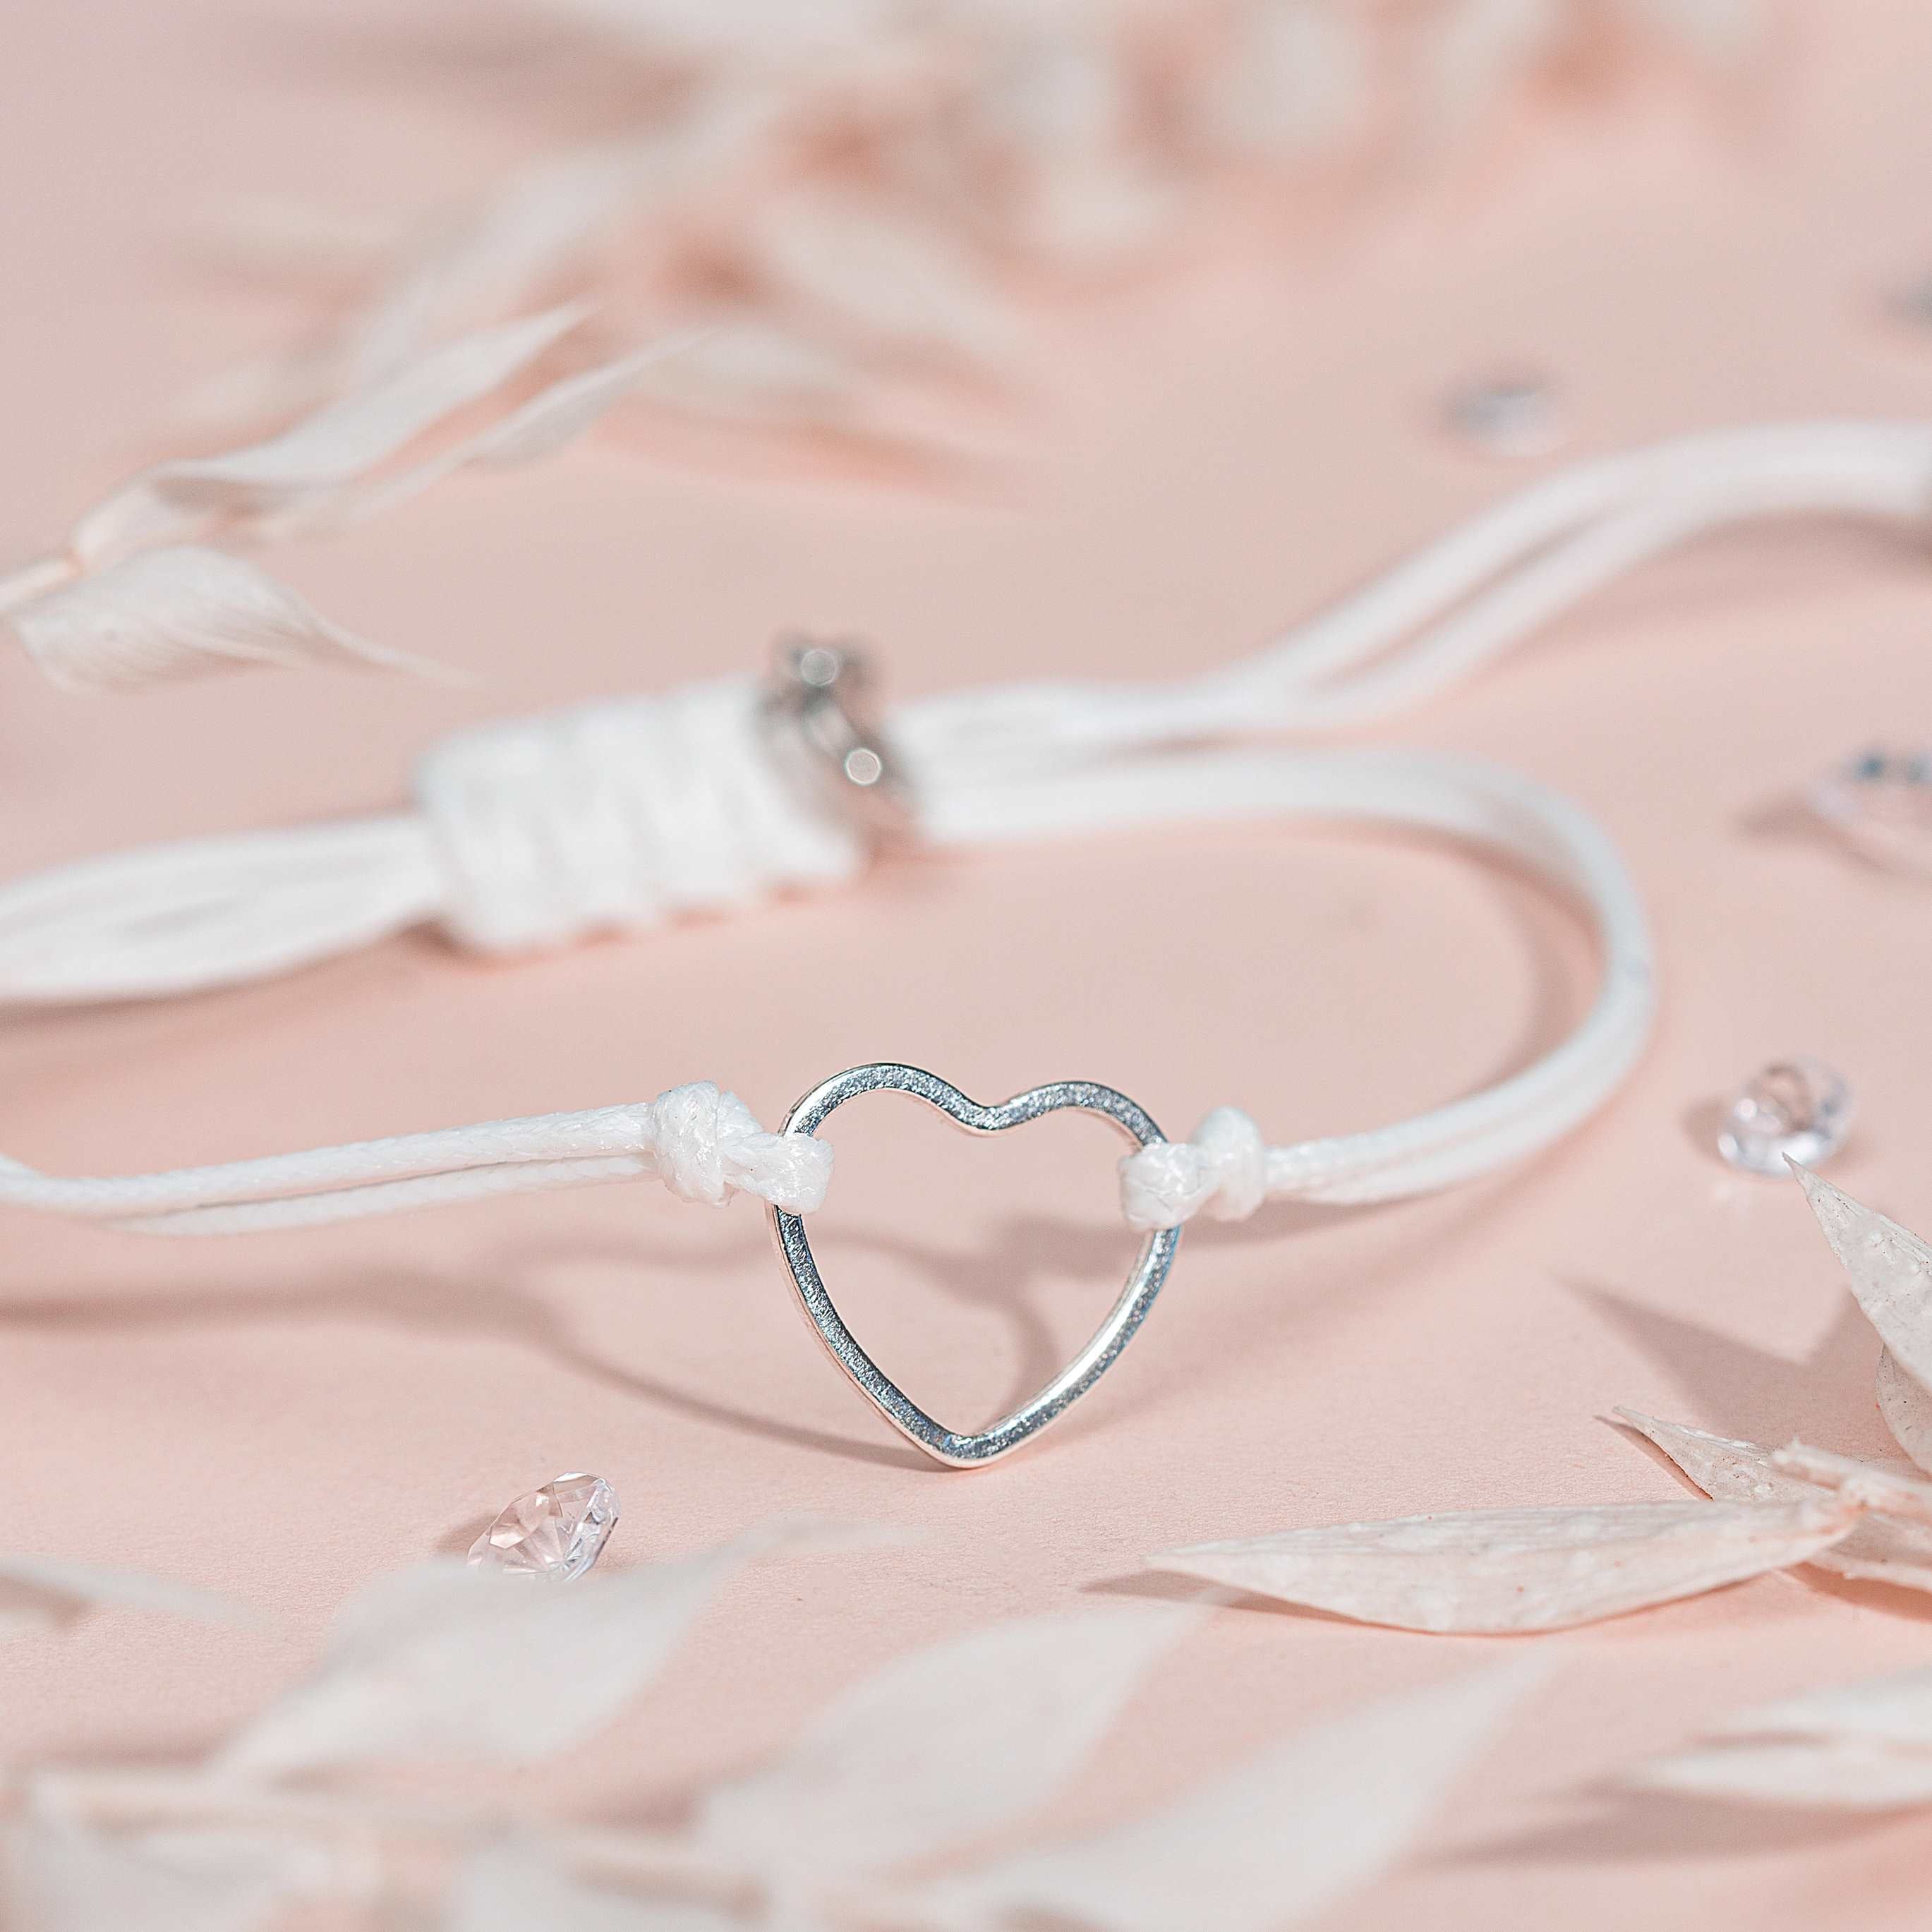 DIY: WISH BRACELET PARTY FAVOR — Haven By The Bae